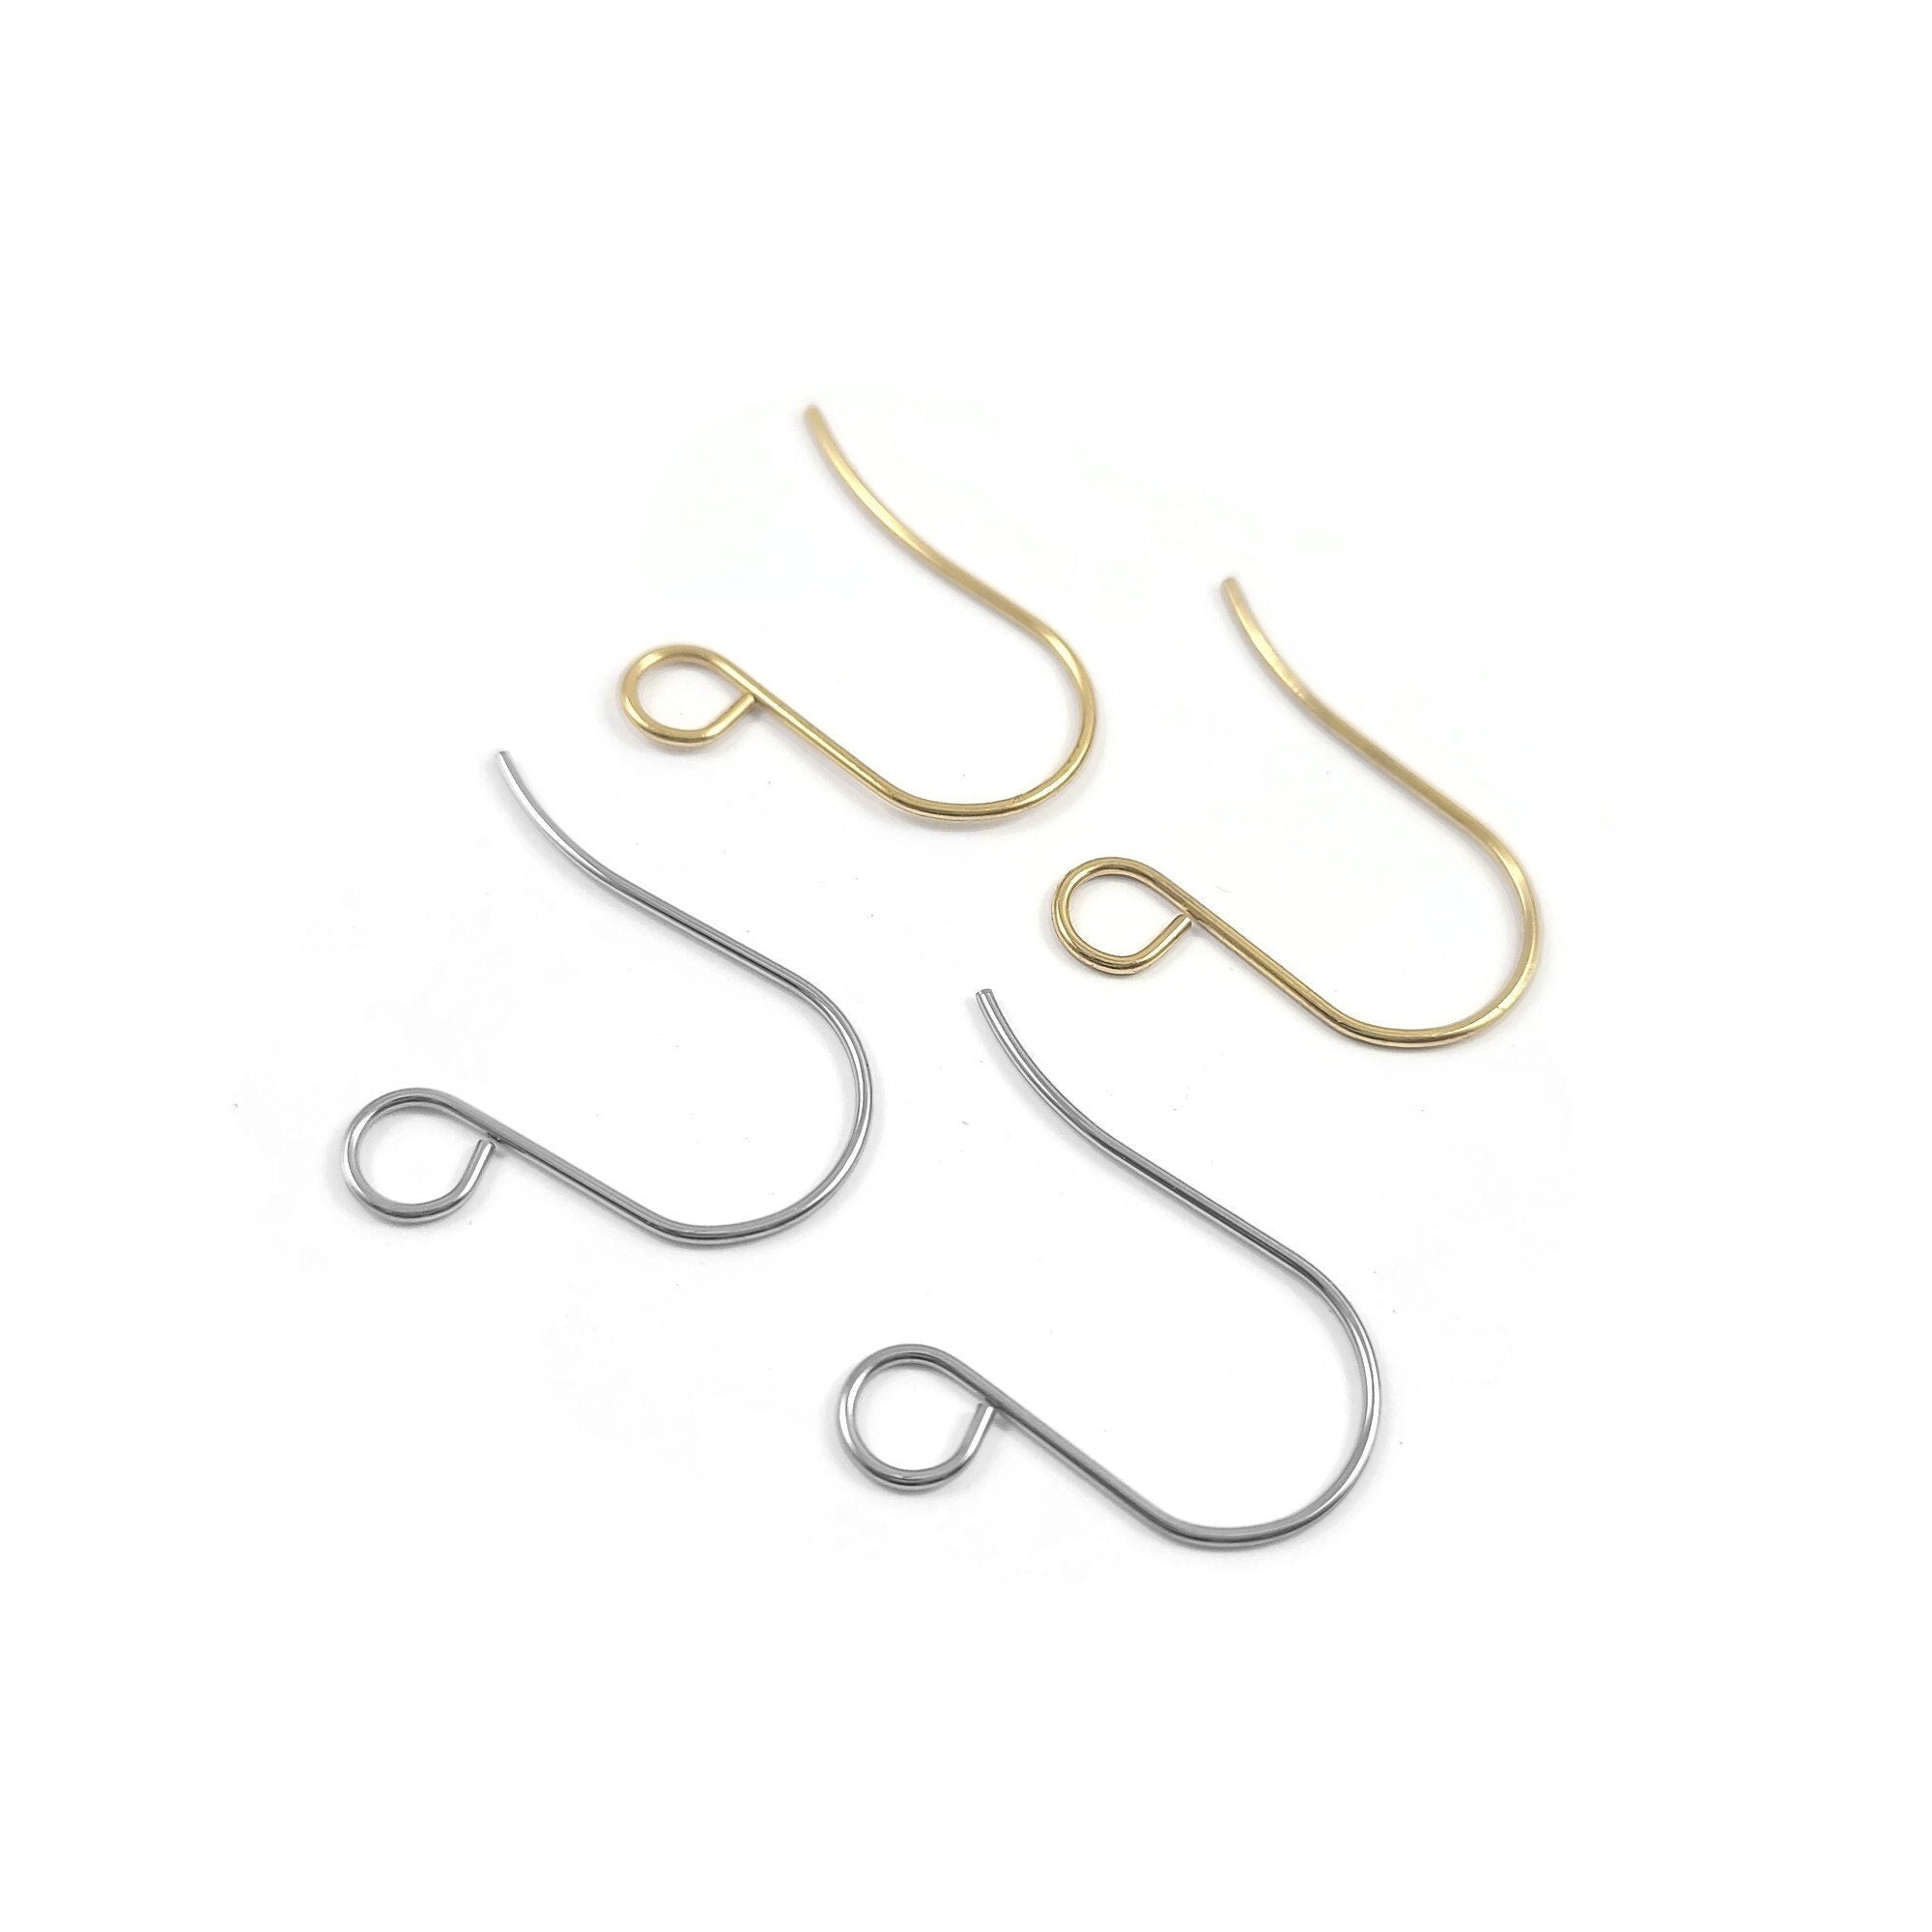 316 Surgical stainless steel ear wire, Flat french earring hooks